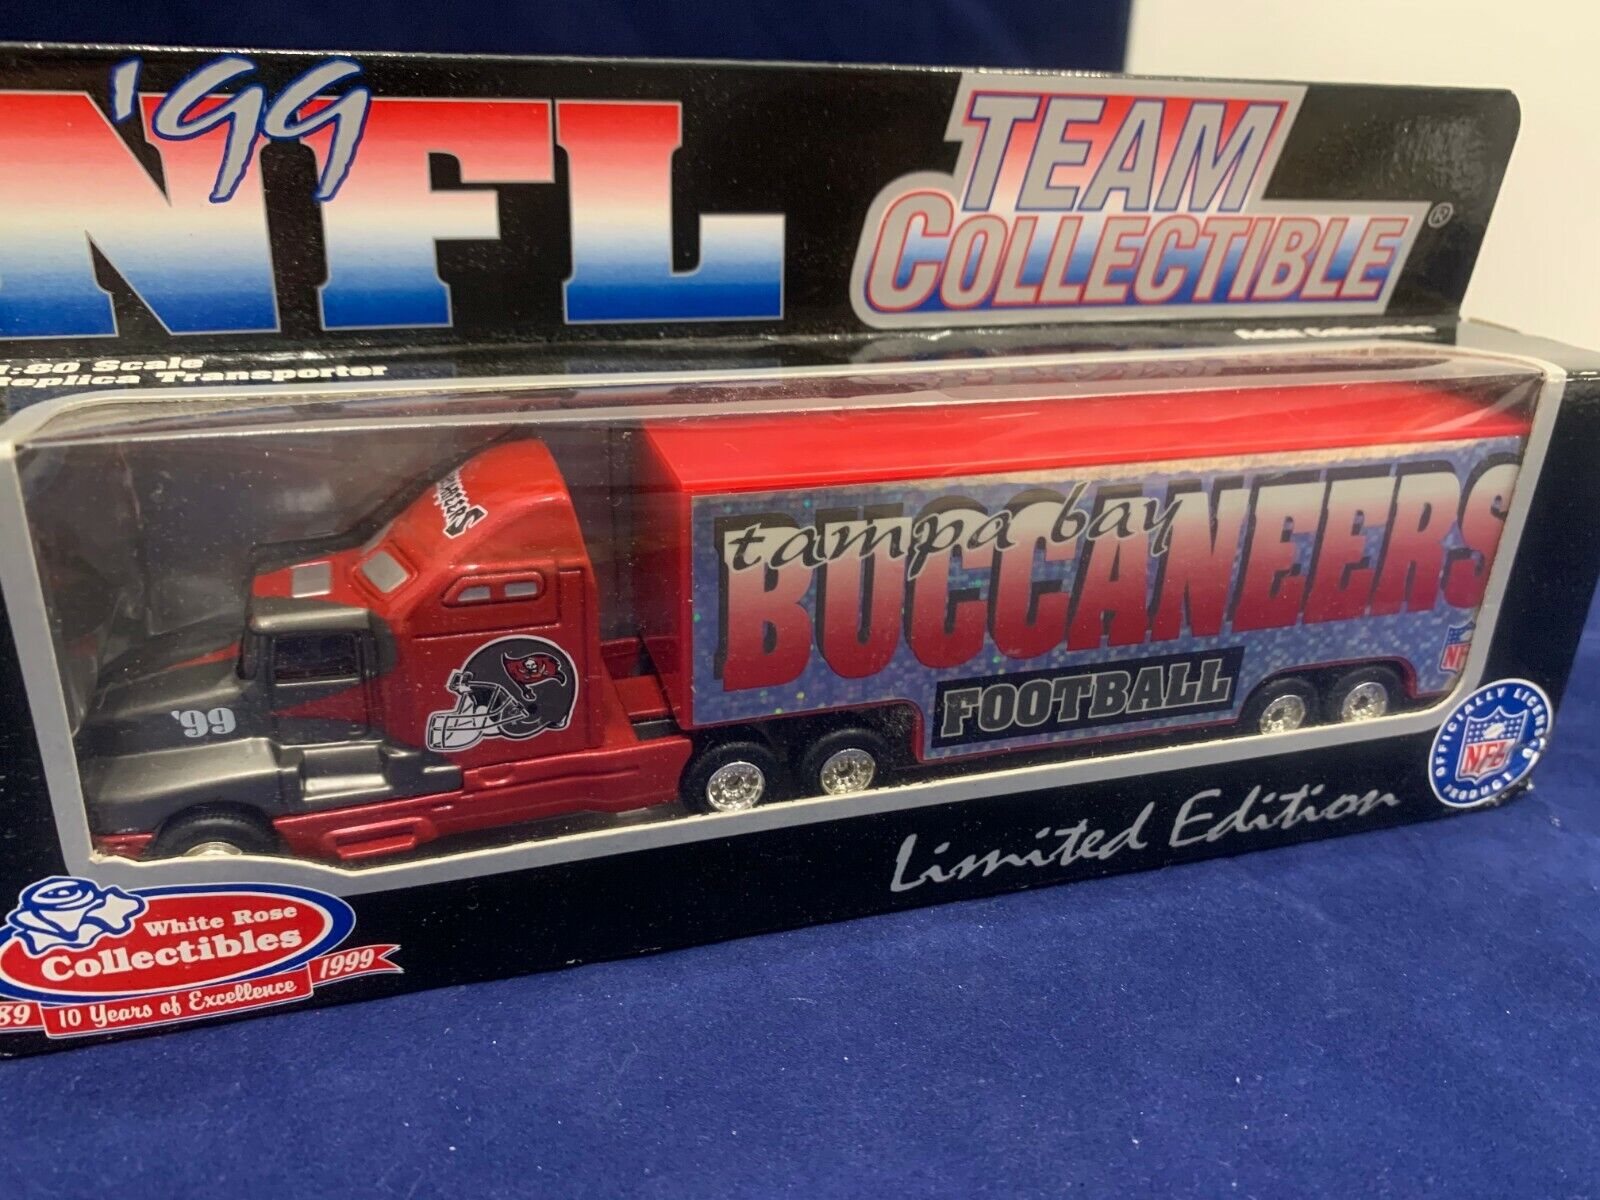 Tampa Bay Buccaneers 1999 Limited Edition NFL Team Collectible Truck 1:80 Scale